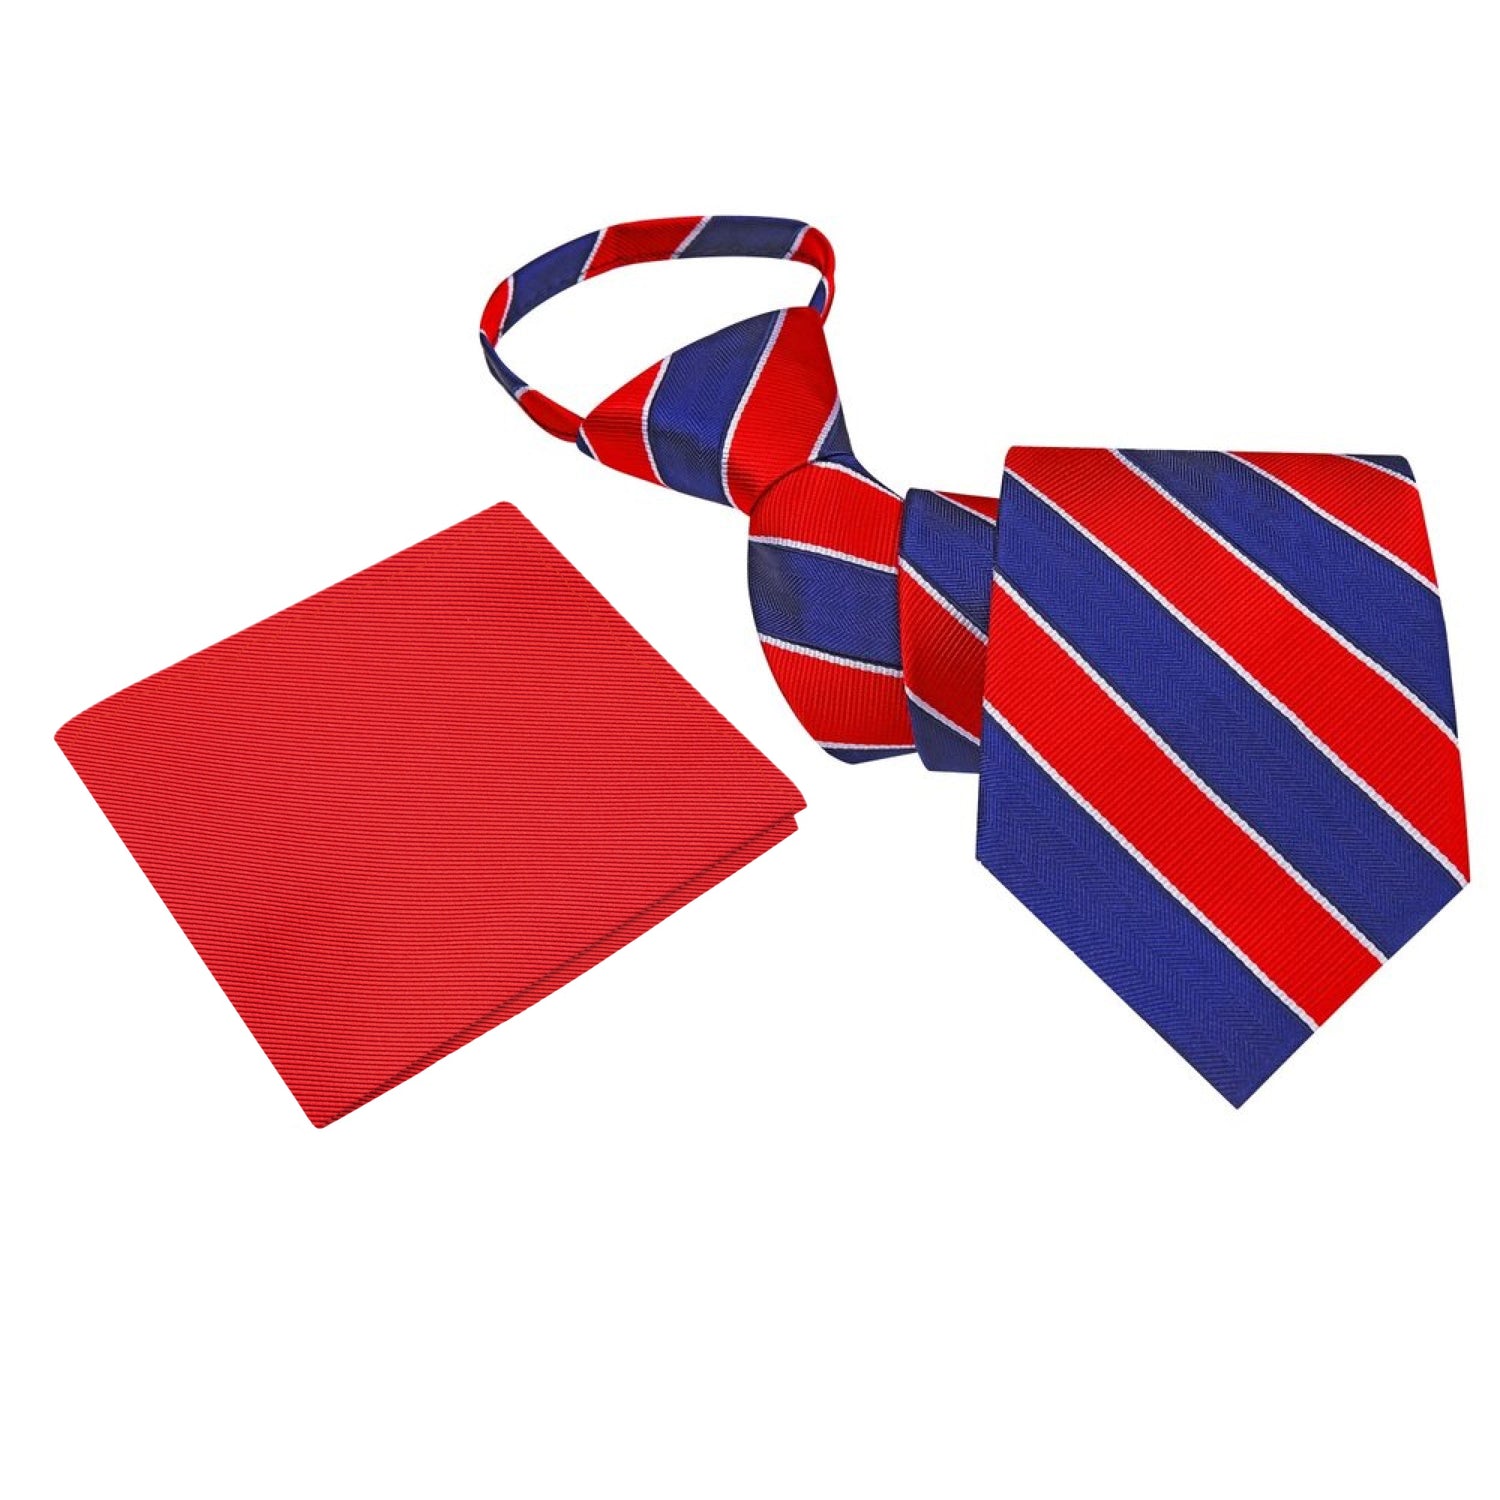 Zipper: Main View: Red, White, Blue Stripe Tie and Red Pocket Square